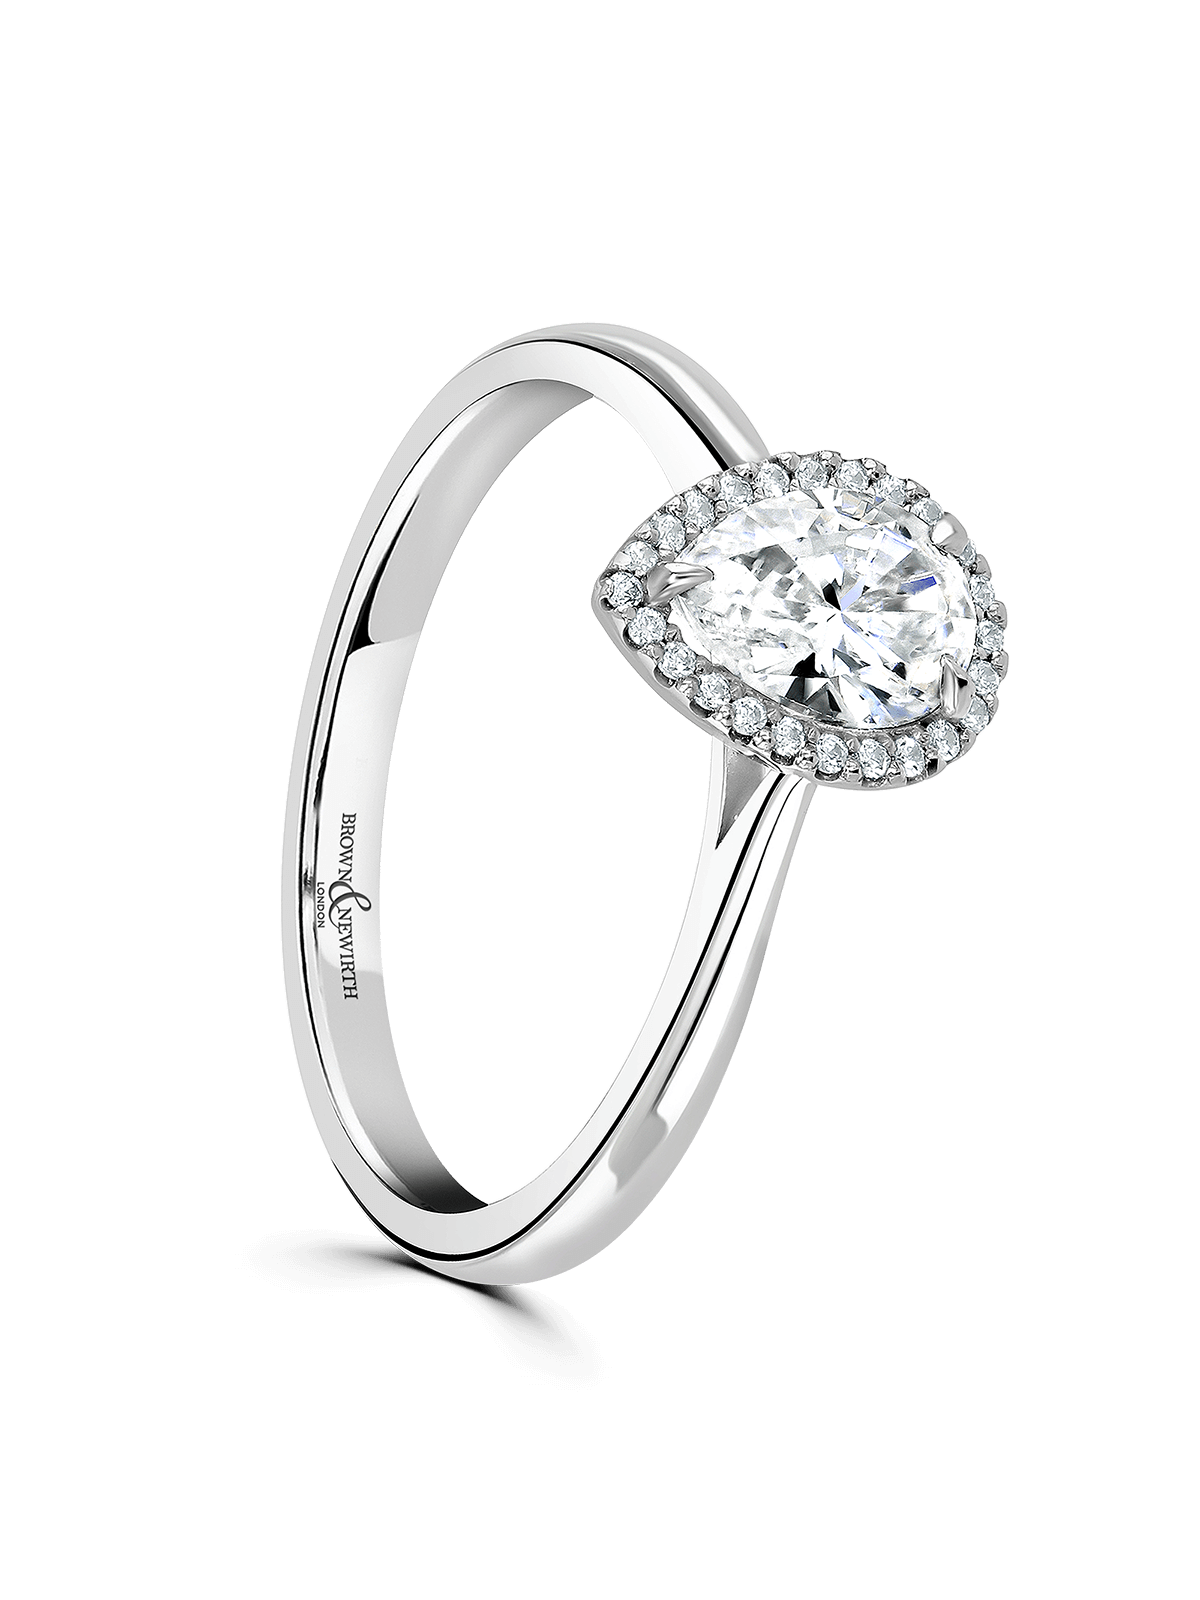 Brown & Newirth Cordelia 0.30ct Pear Cut Certificated Diamond Halo Engagement Ring in Platinum